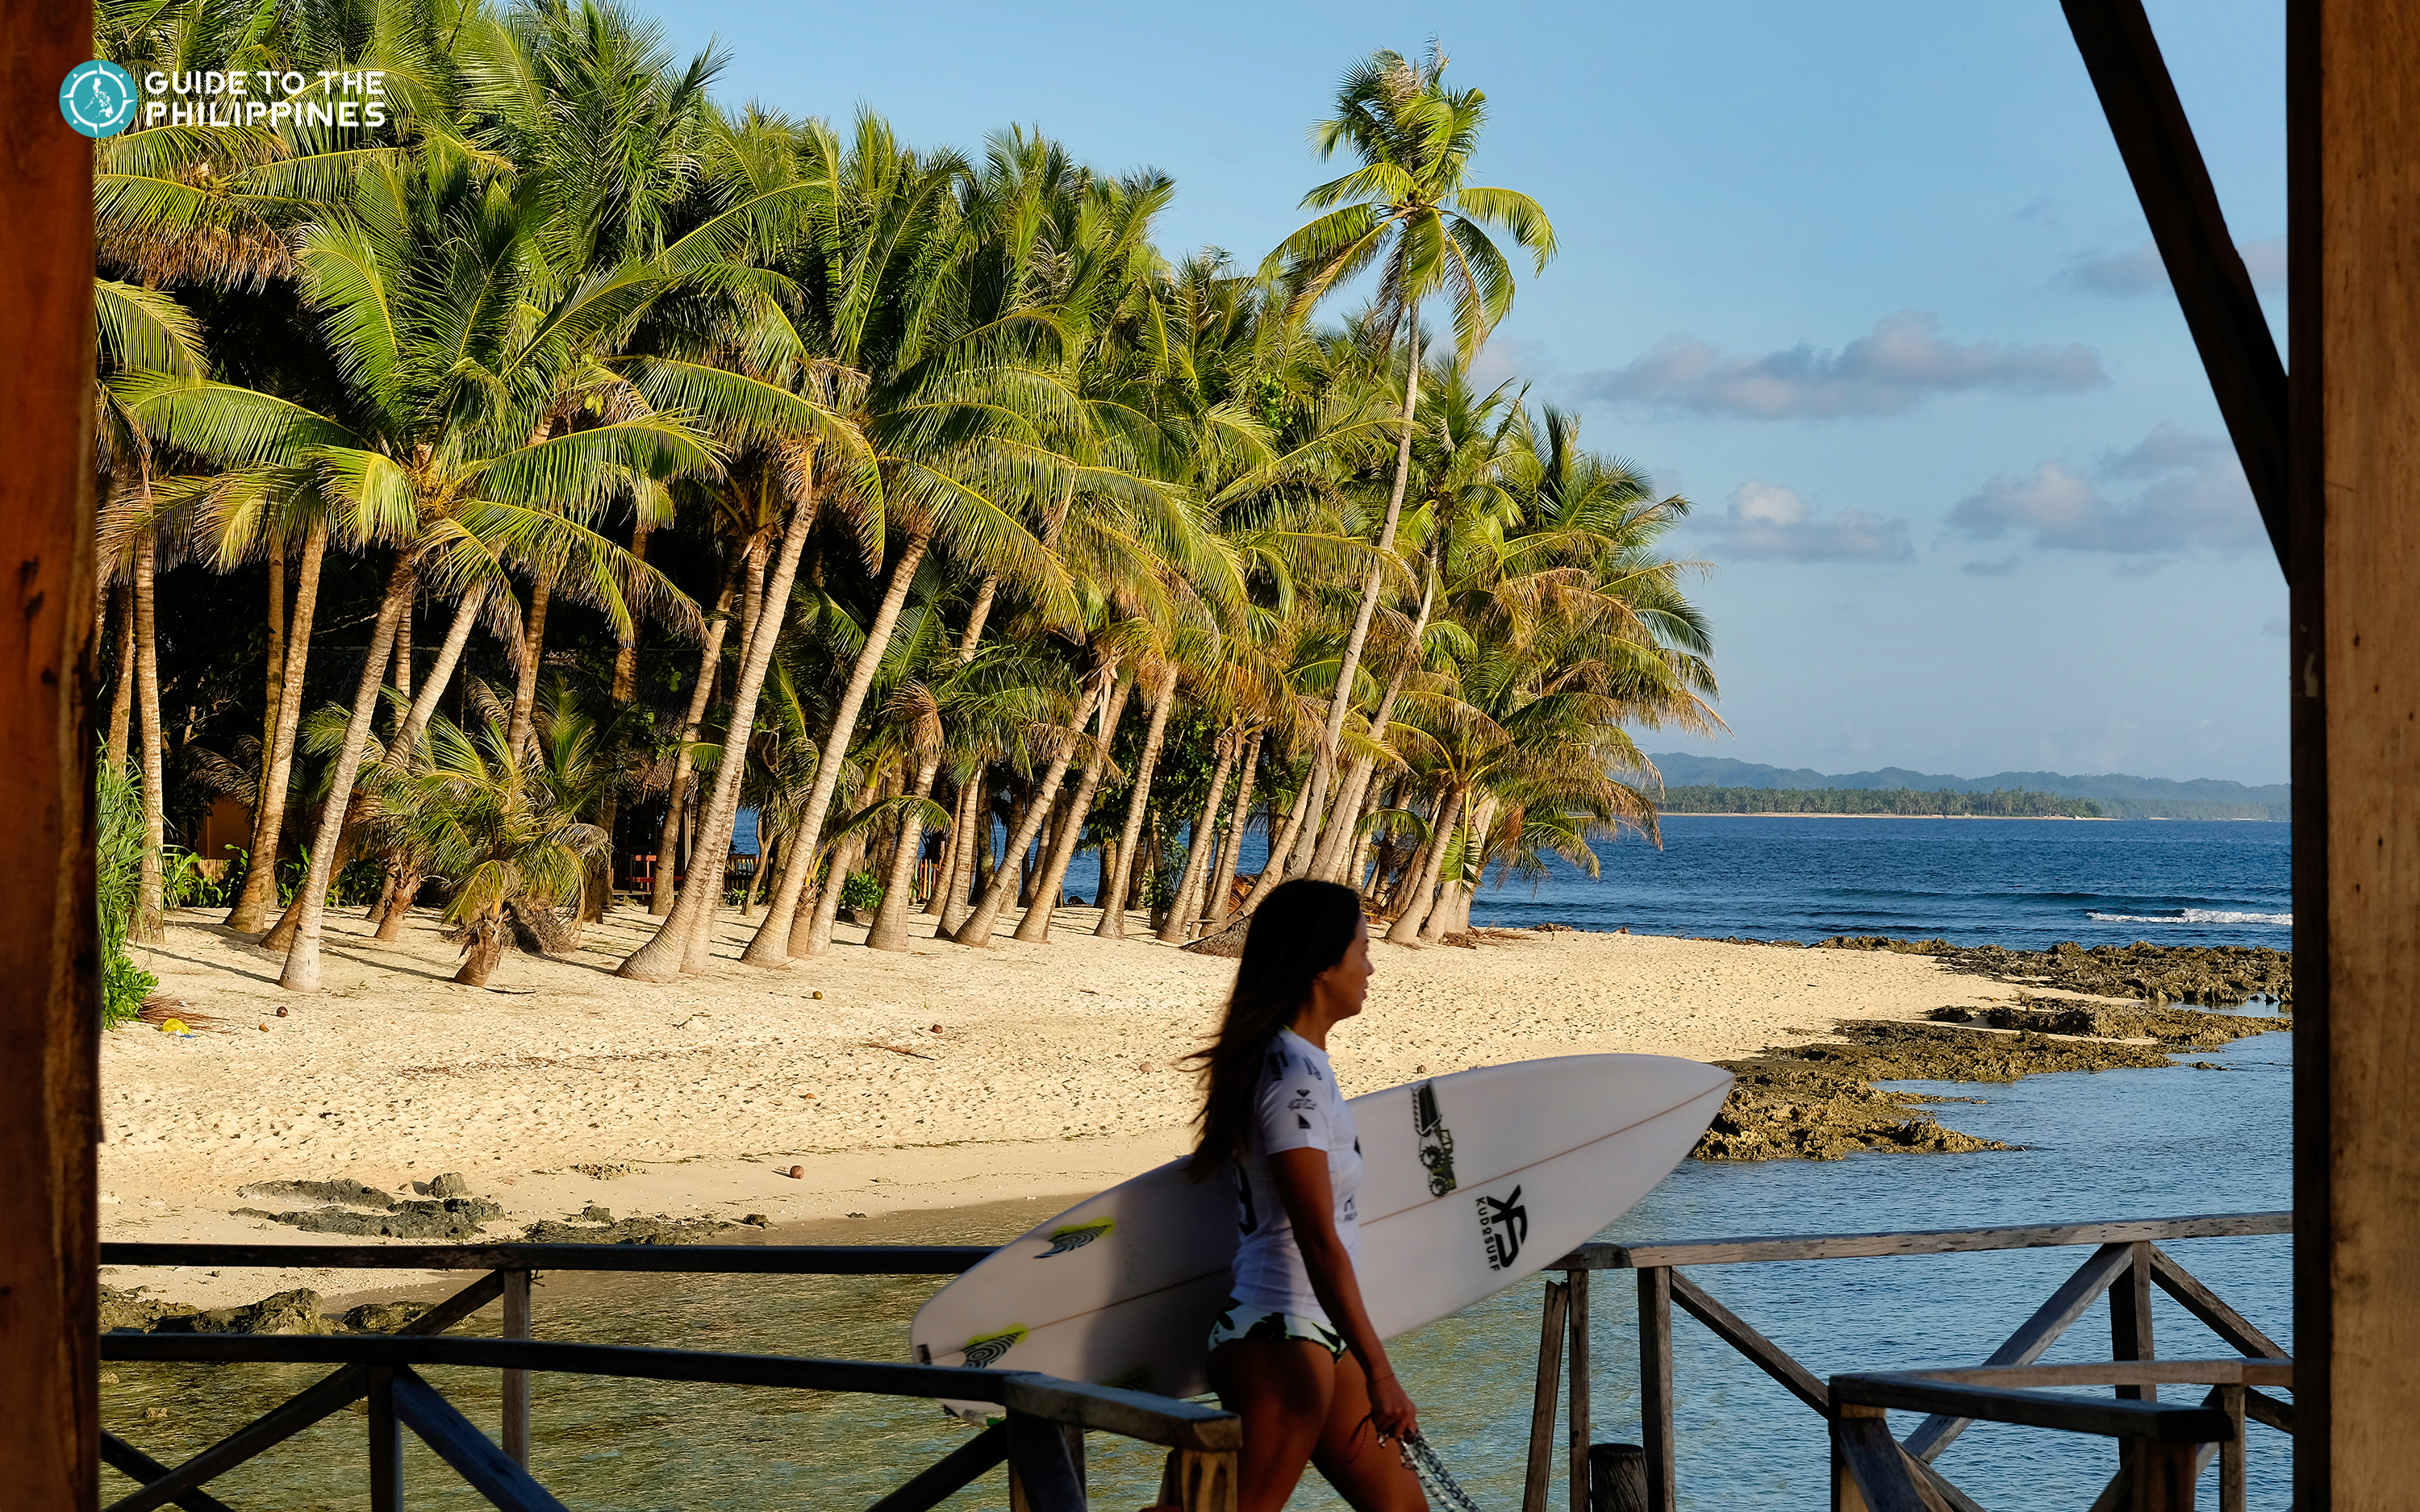 Fall in love with Siargao's laidback vibe, stunning natural attractions, and some of the best surf breaks in the world! 